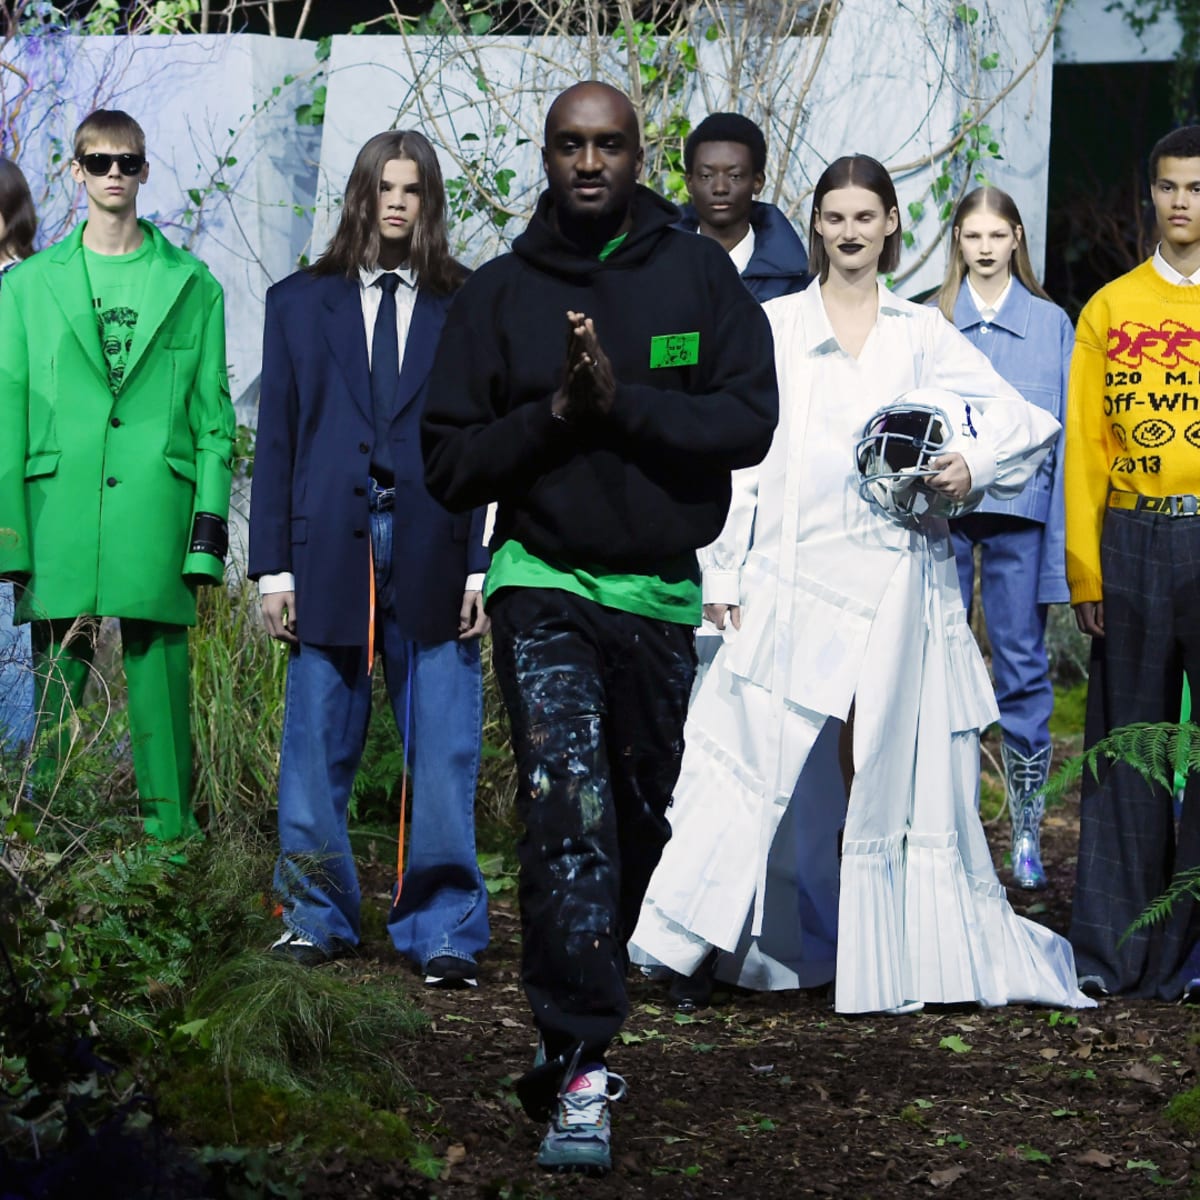 Virgil Abloh, who made diversity a force for fashion, dies at 41